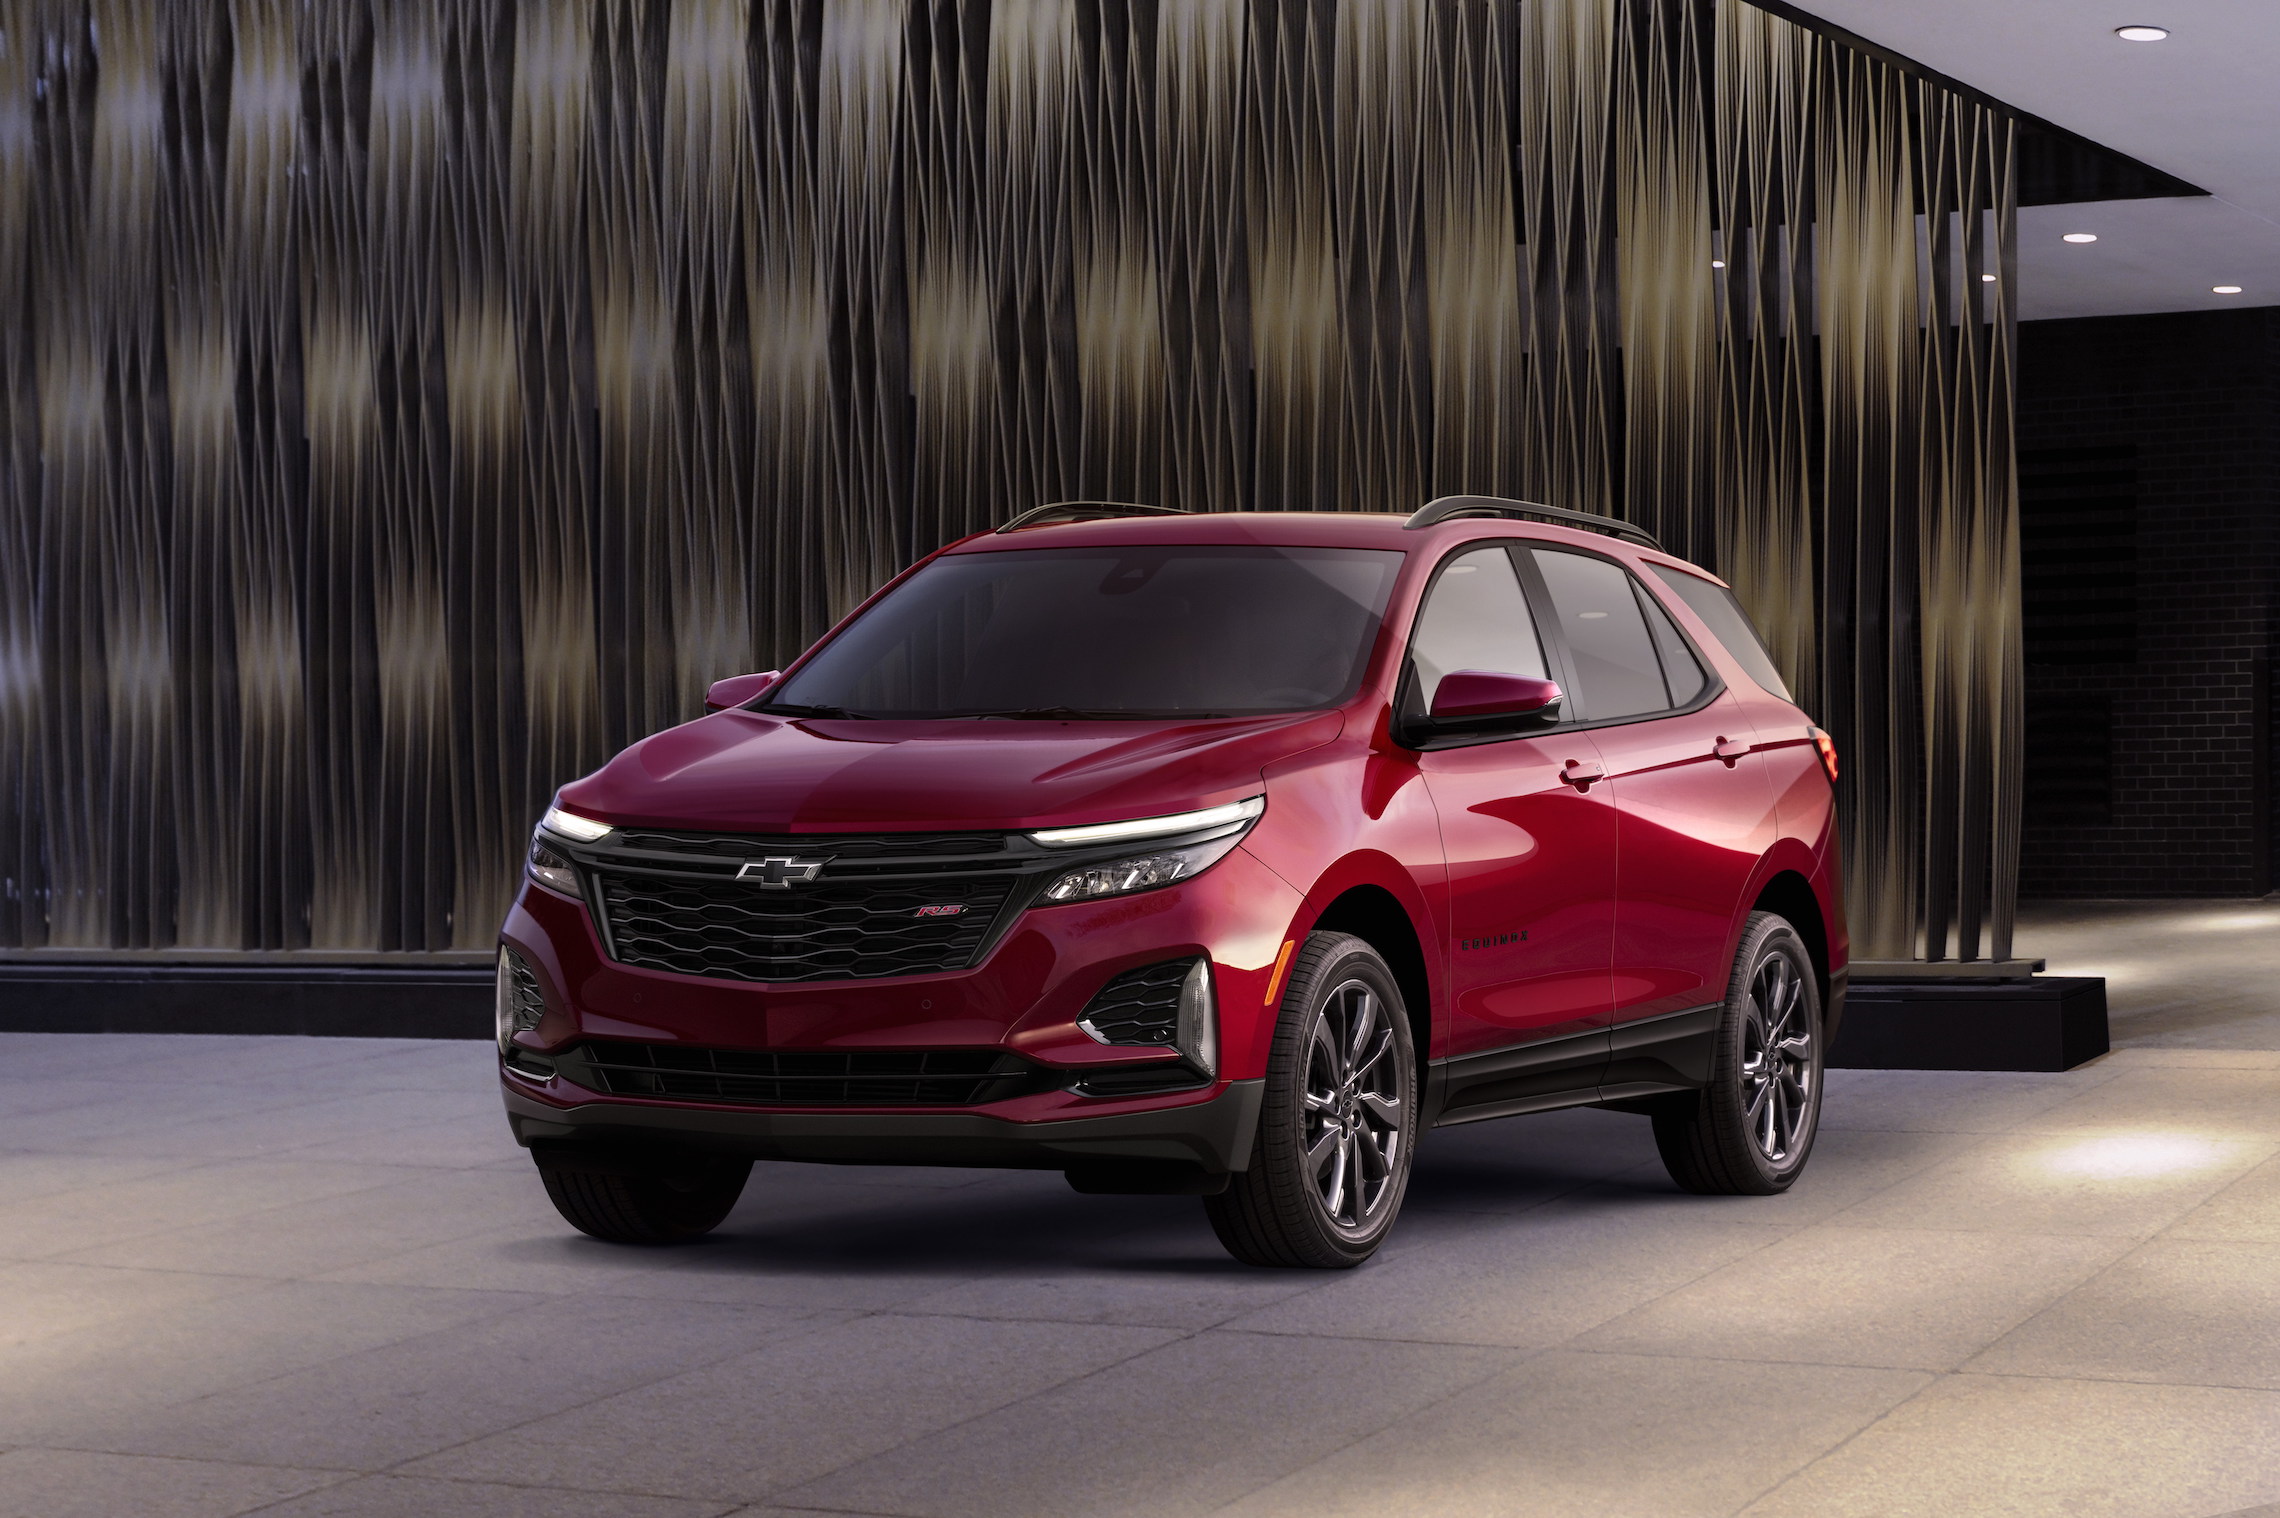 When Will the 2022 Chevrolet Equinox and Traverse Be Released The News Wheel